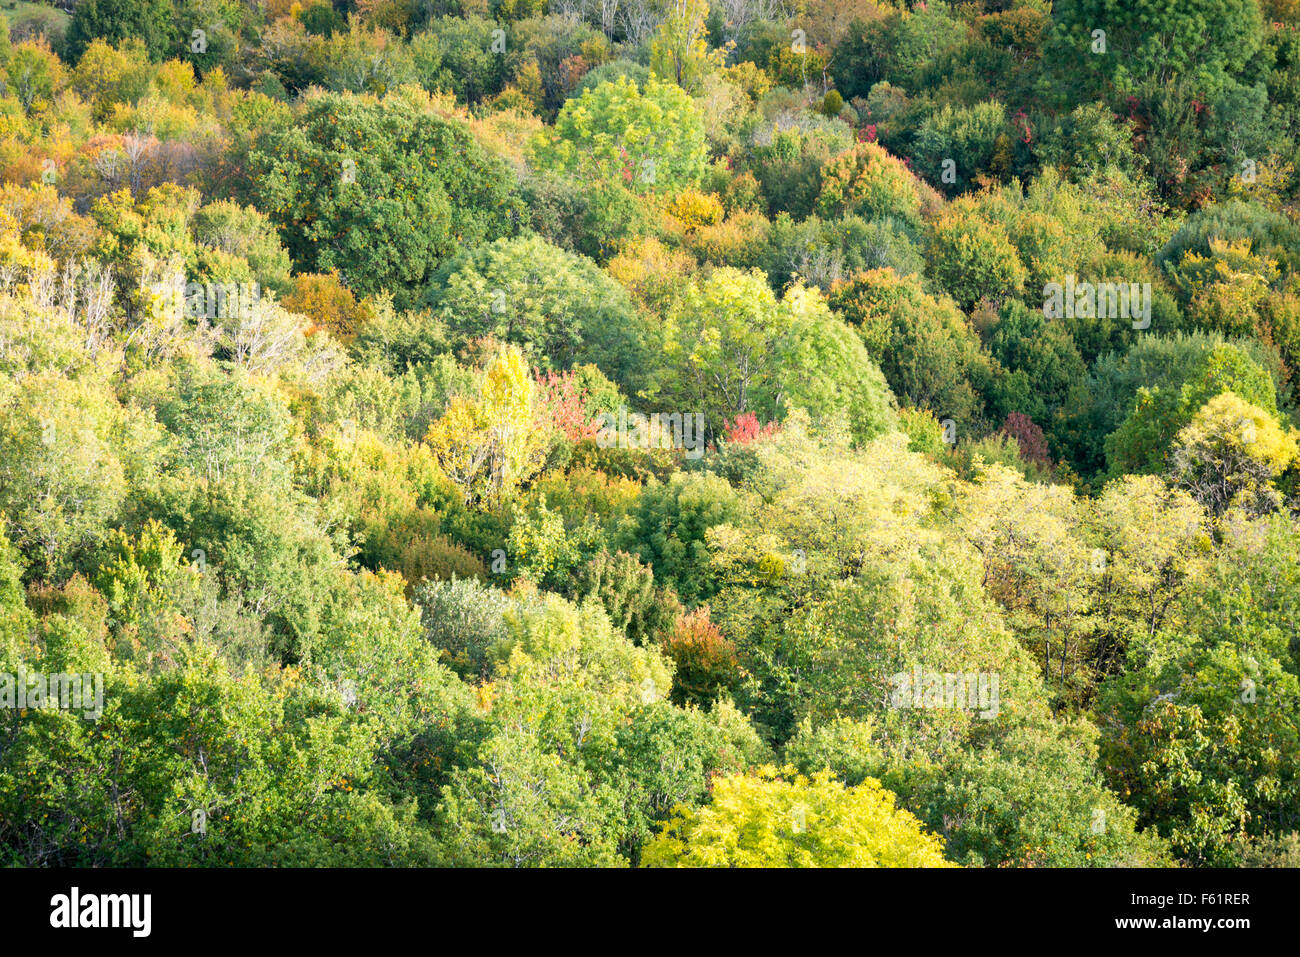 A view across a woodland forest and trees as they begin to show autumn colours Stock Photo